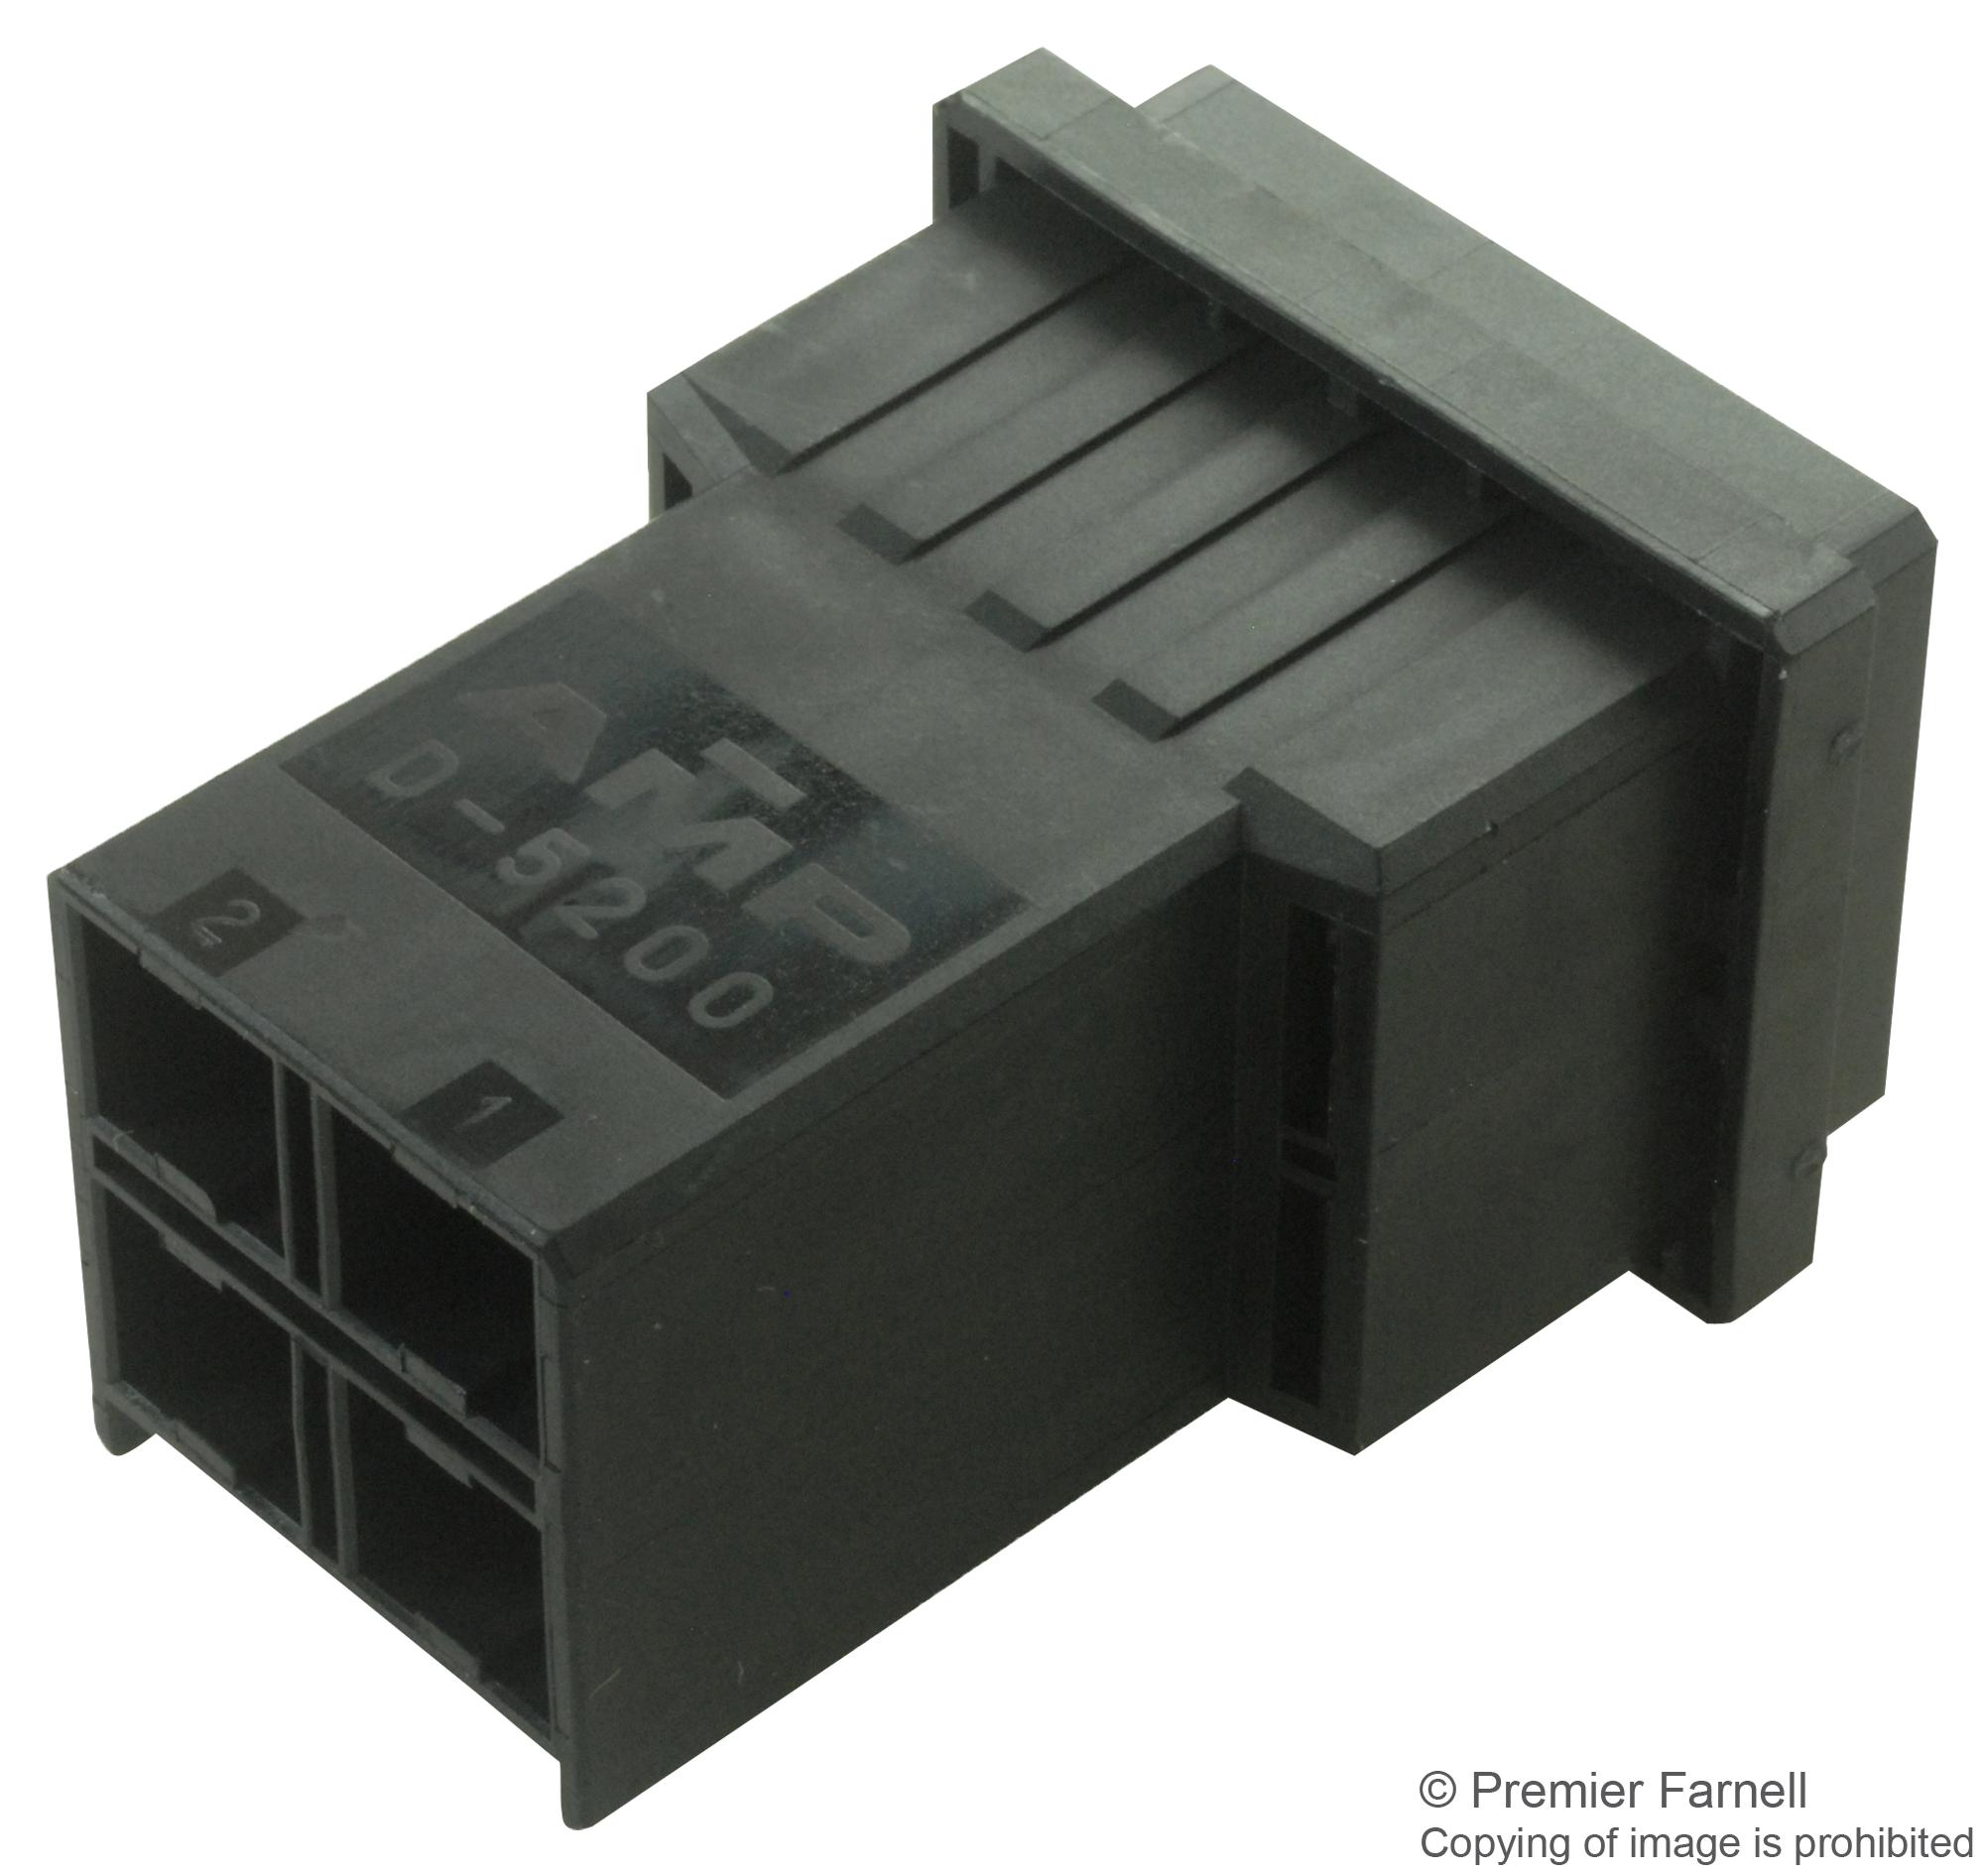 2-917808-2 CONNECTOR HOUSING, PLUG, 4POS, 10.16MM AMP - TE CONNECTIVITY